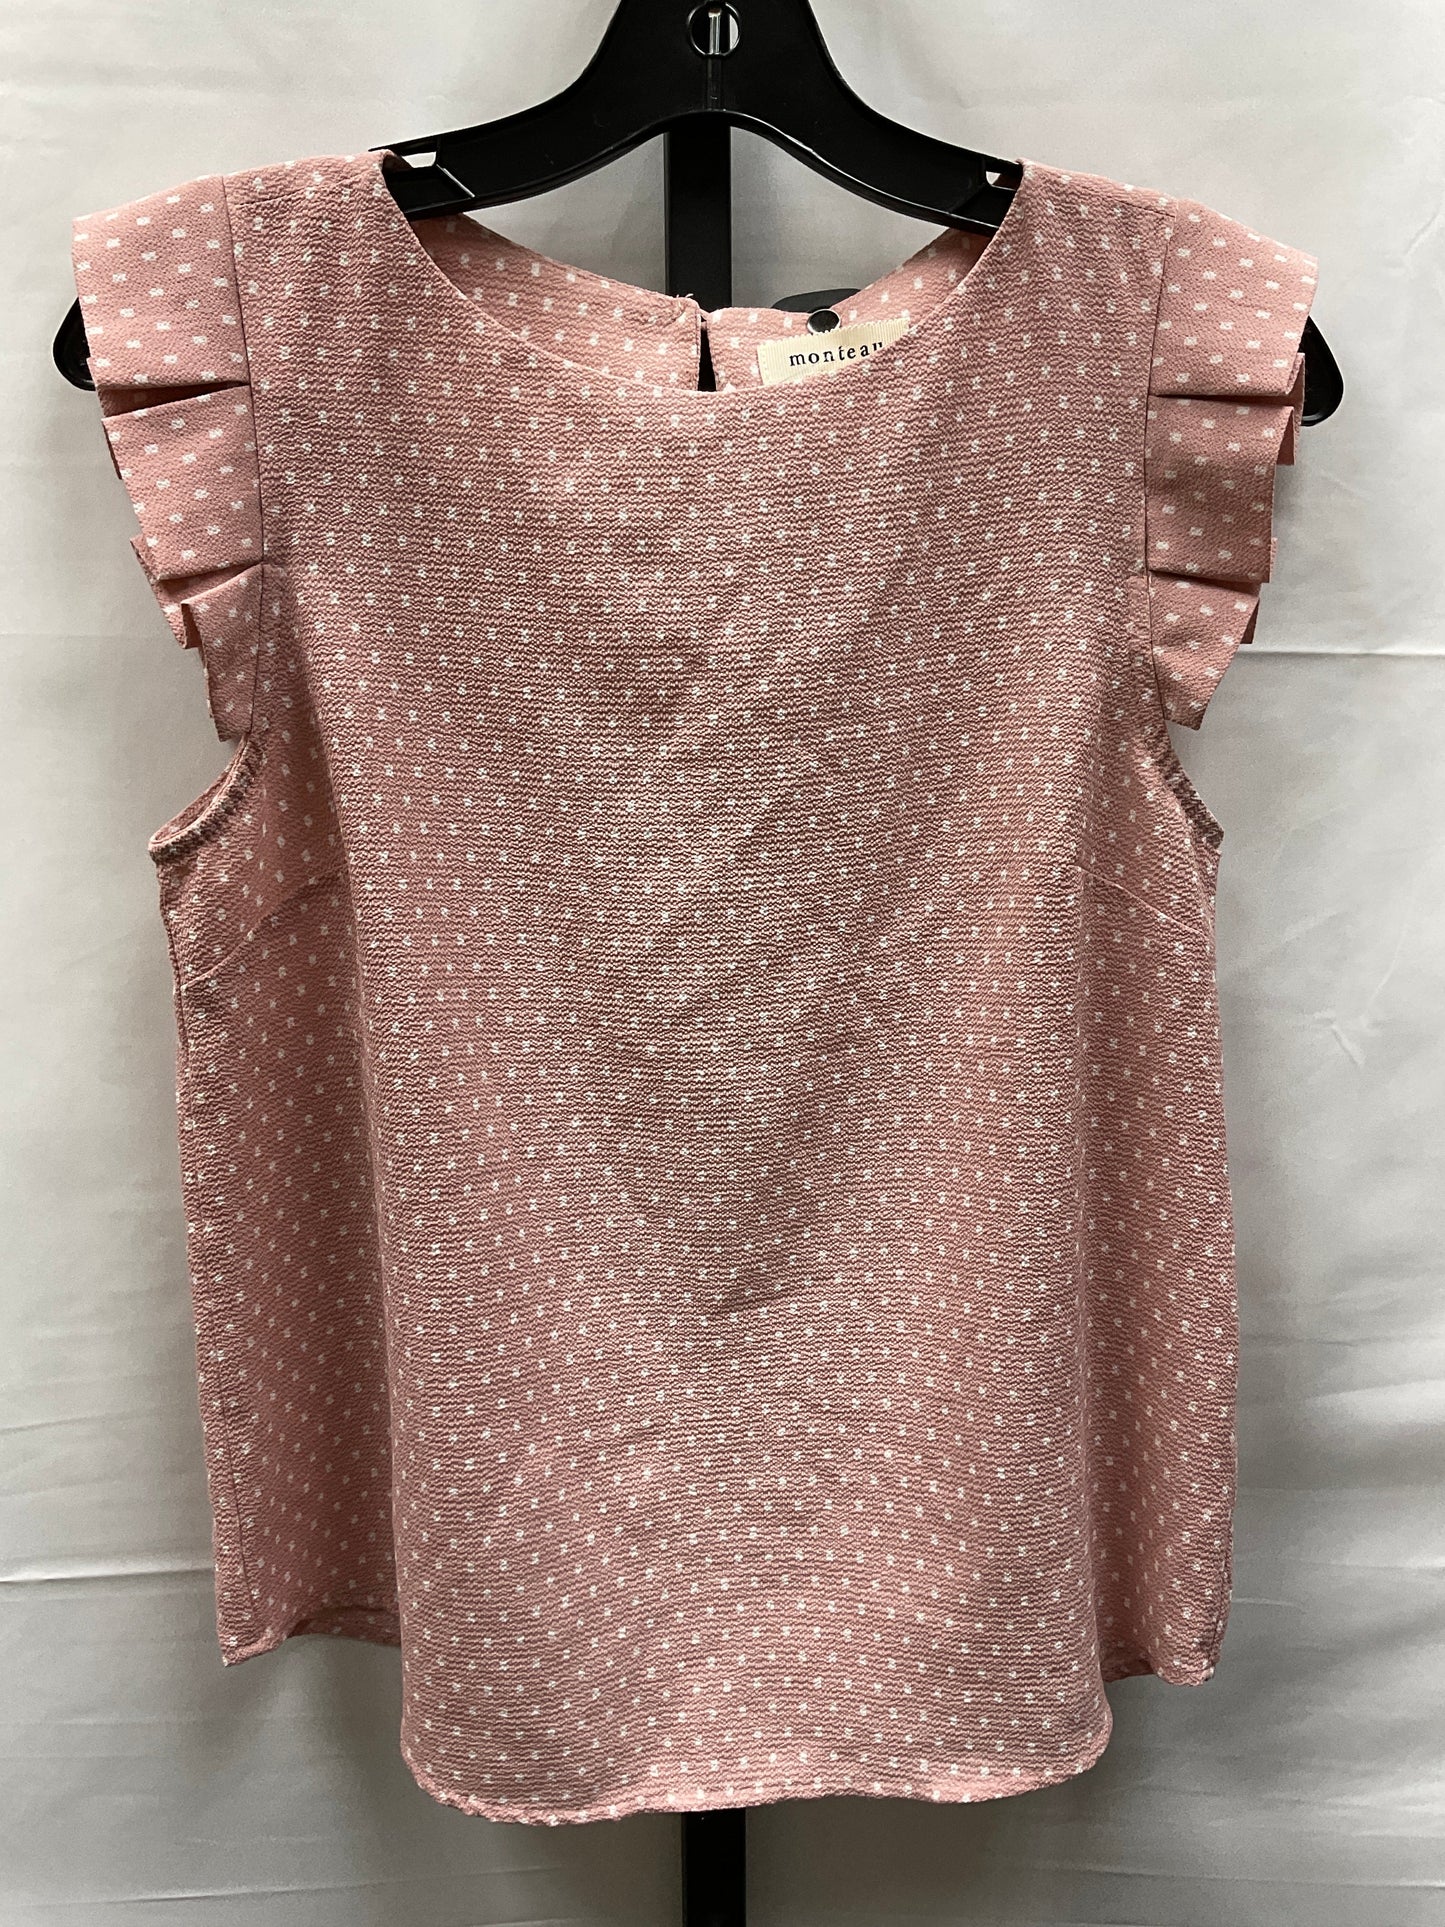 Pink & White Top Short Sleeve Monteau, Size S